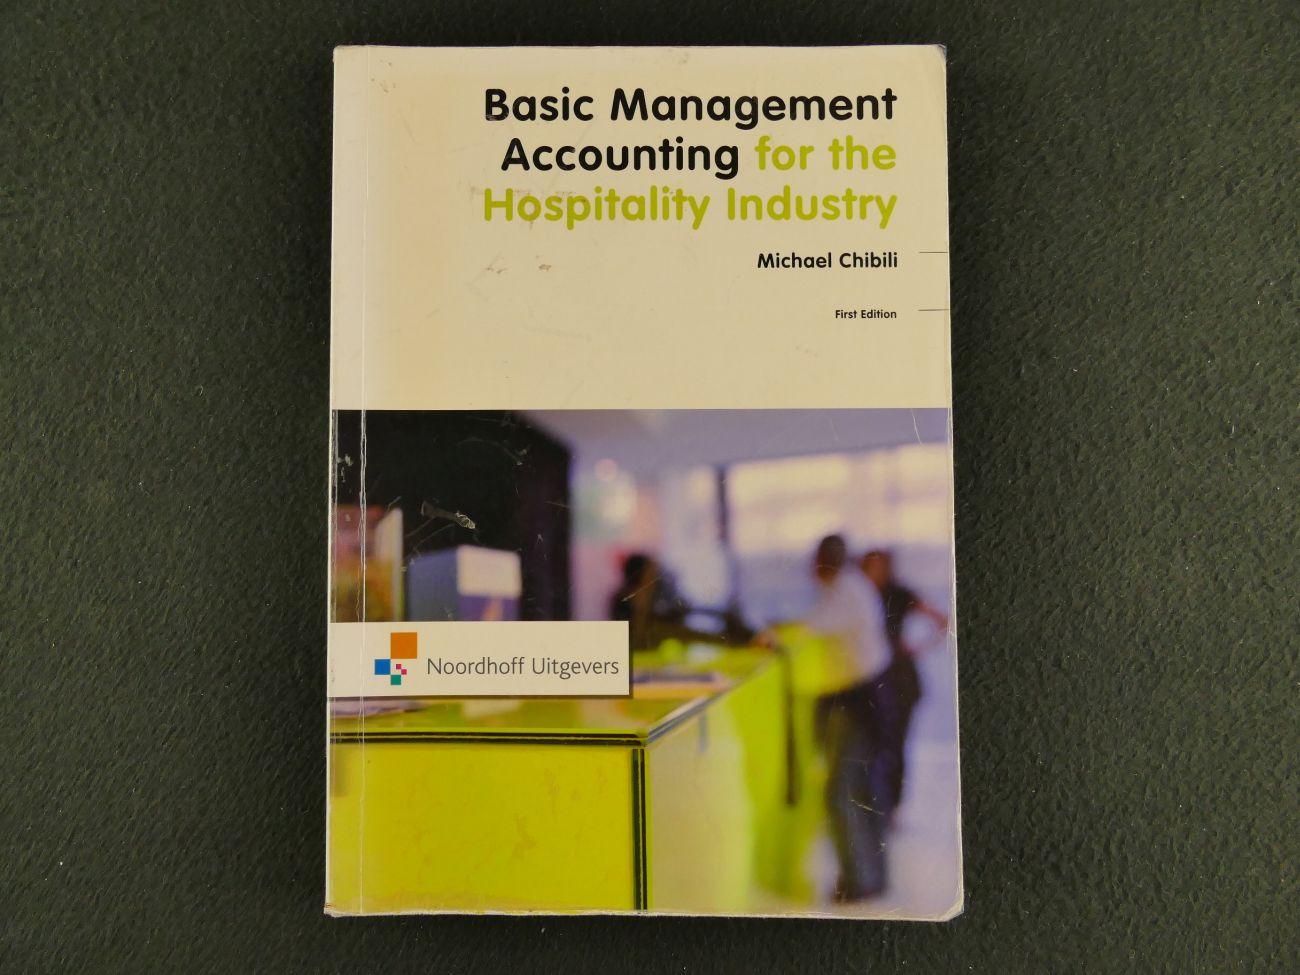 Chibili, Michael - Basic management accounting for the hospitality industry